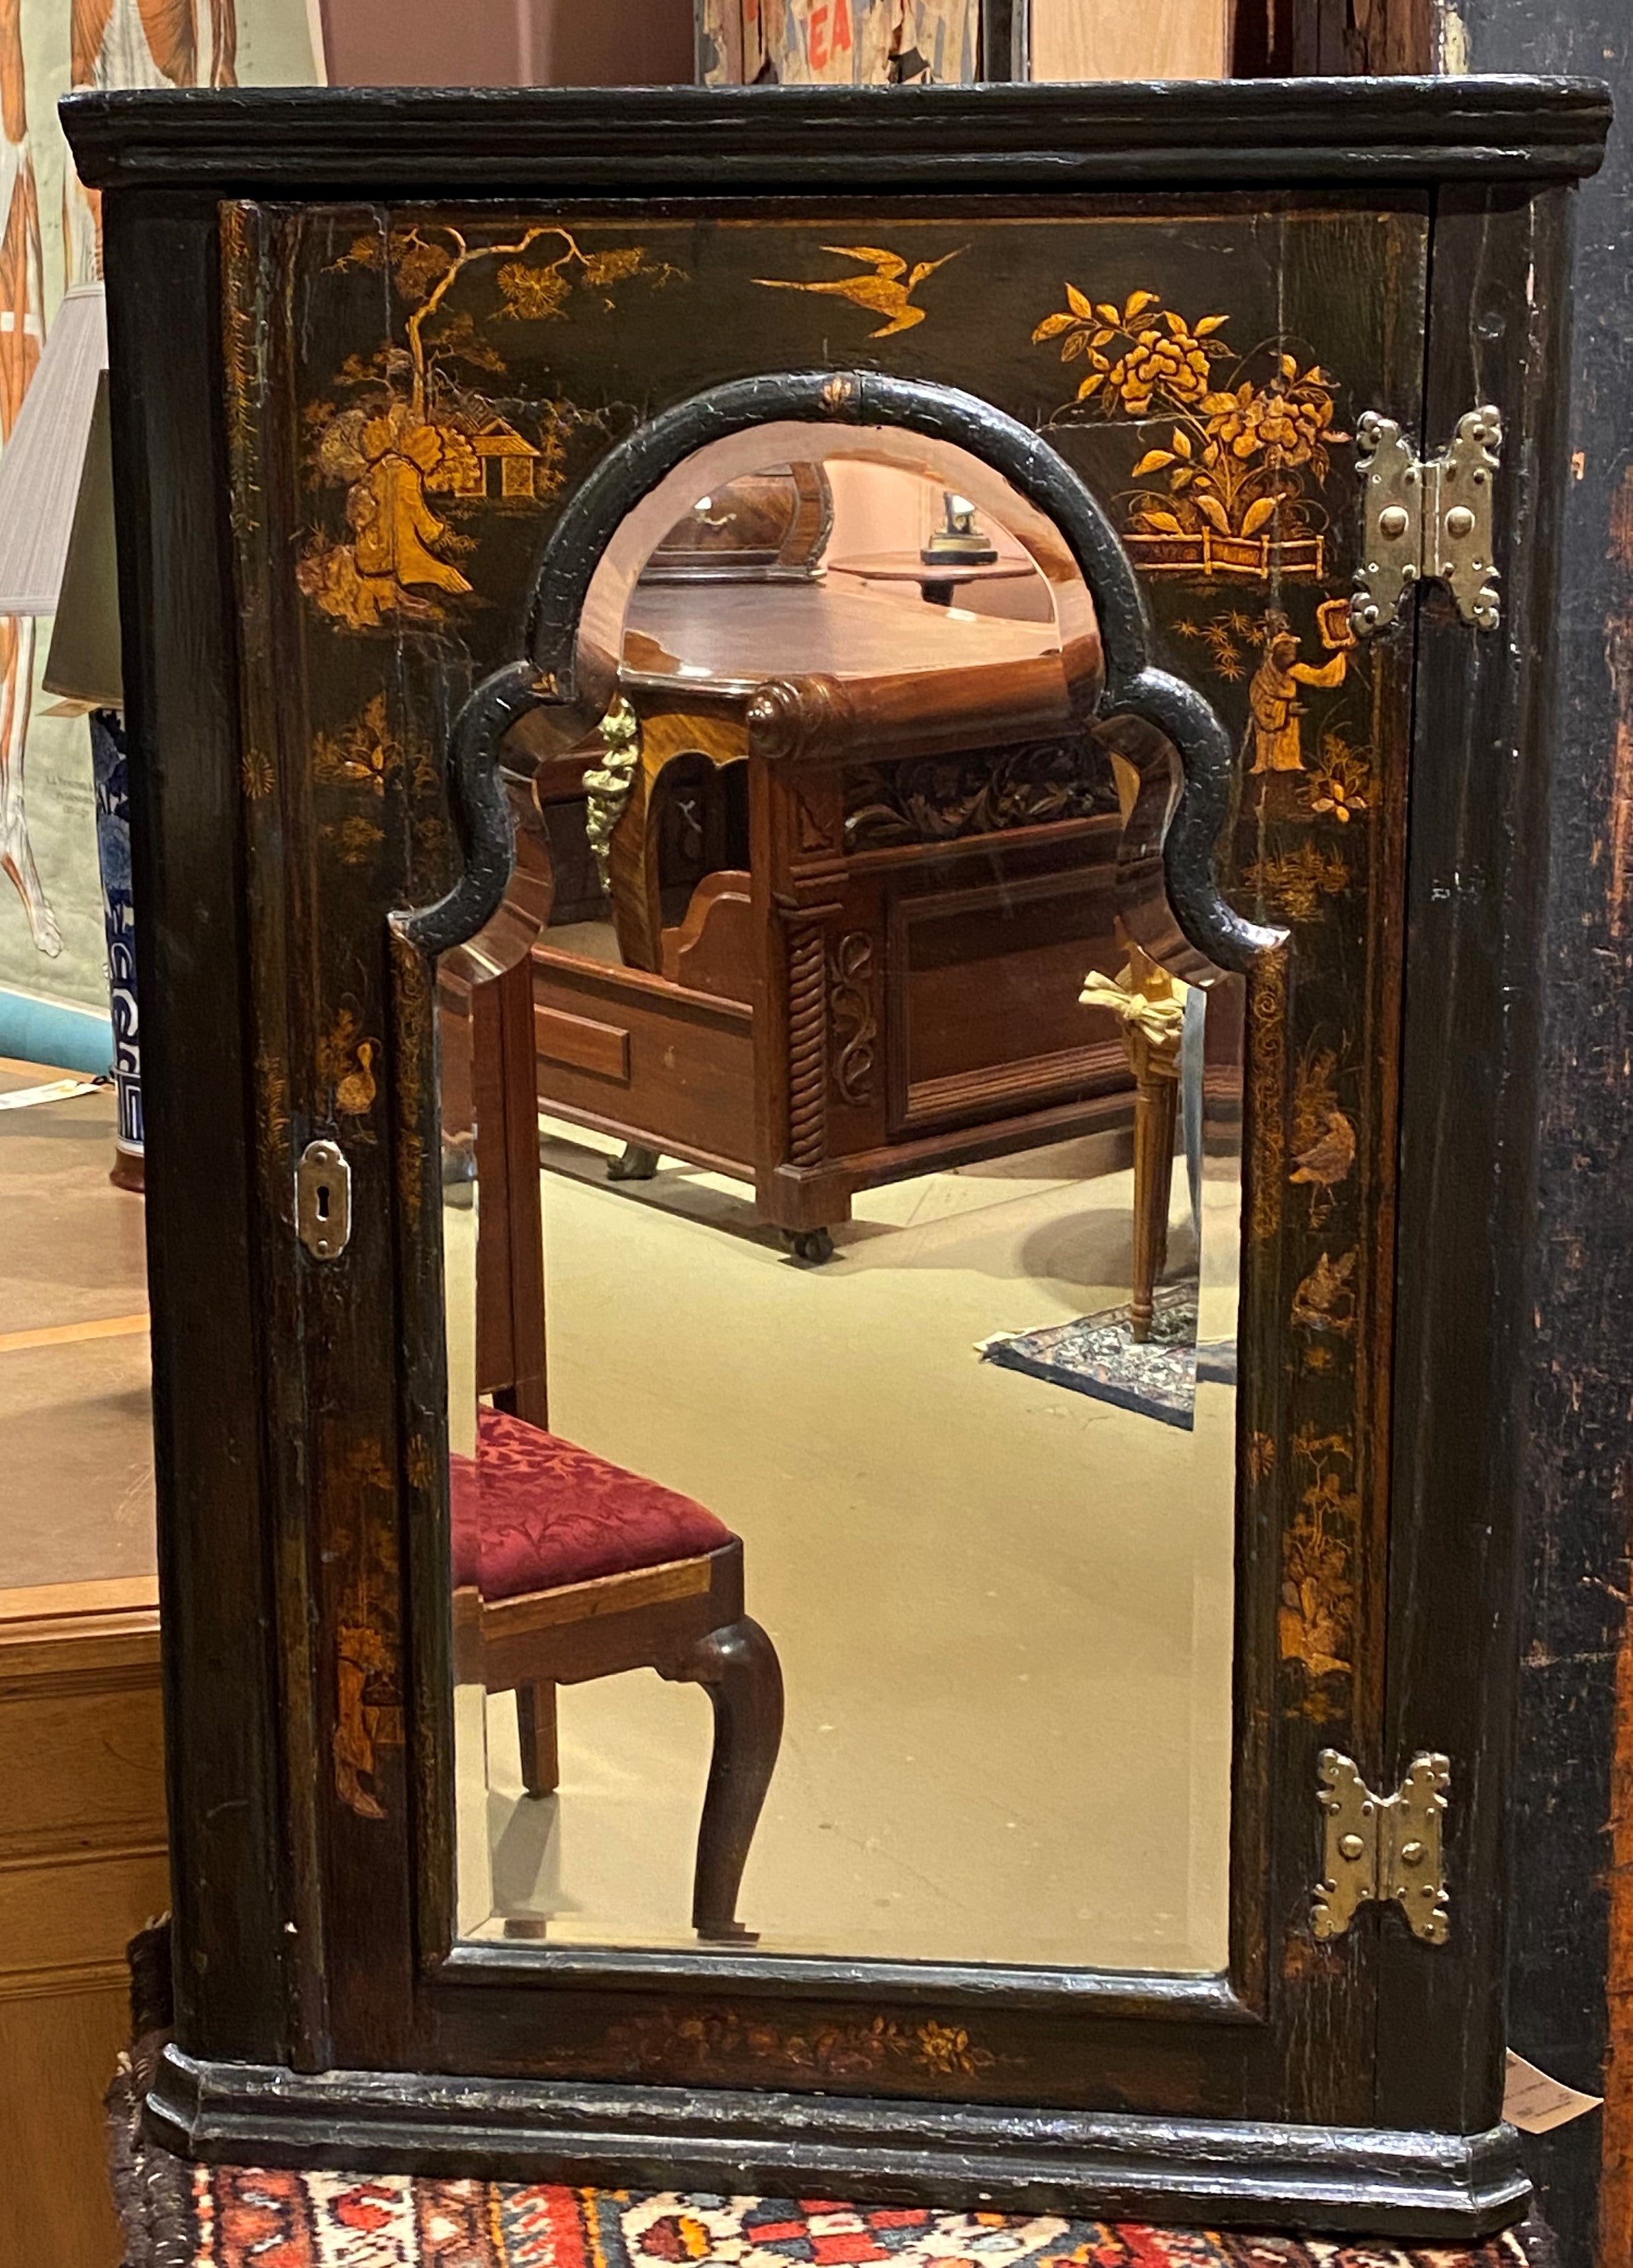 19th century chinoiserie painted and lacquered corner cupboard with mirrored door. Great shaped interior top shelf. Very good overall condition, with some craquelure to the finish, and wear commensurate with age and use. 